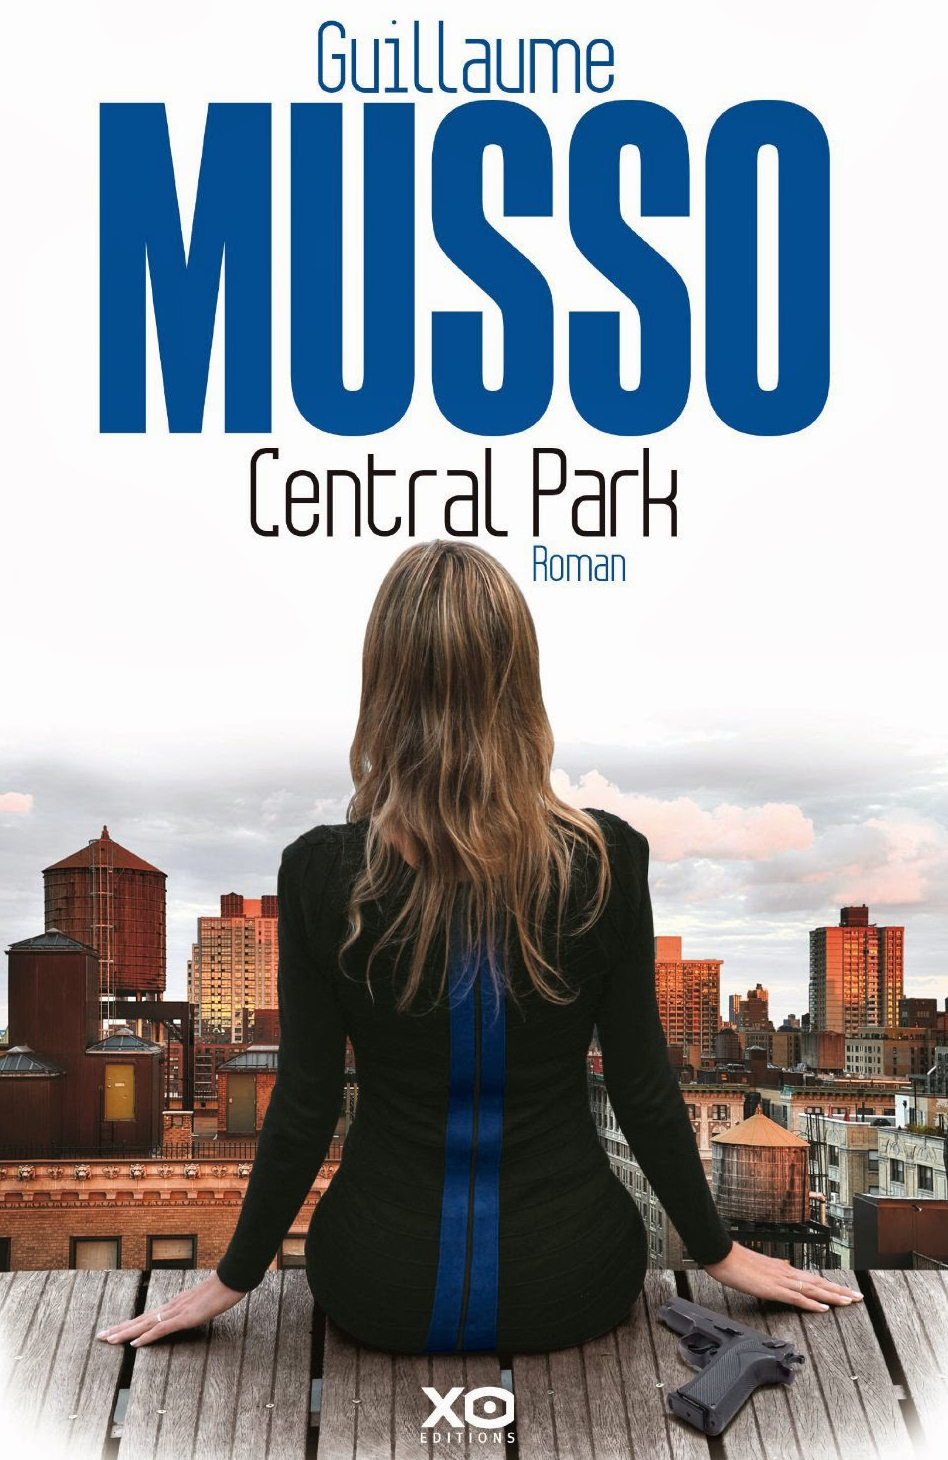 Musso Guillaume ♦ Central Park